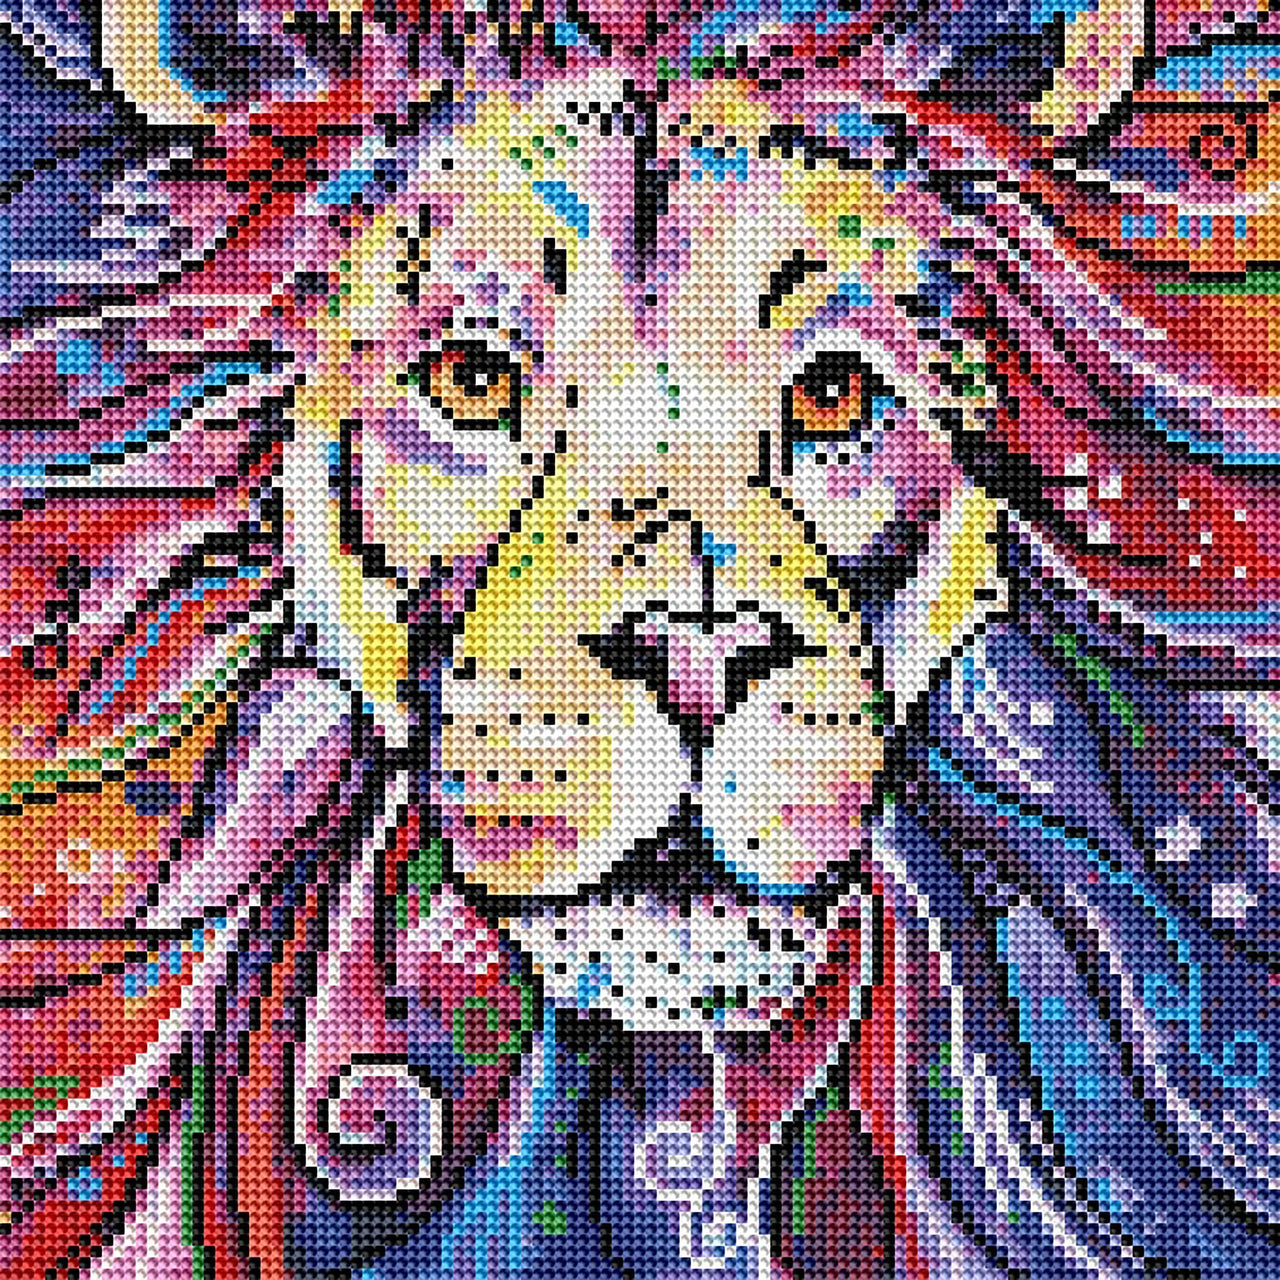 Diamond Painting The Chief 12.6″ x 12.6″ (32cm x 32cm) / Round With 35 Colors including 1 AB / 12,769